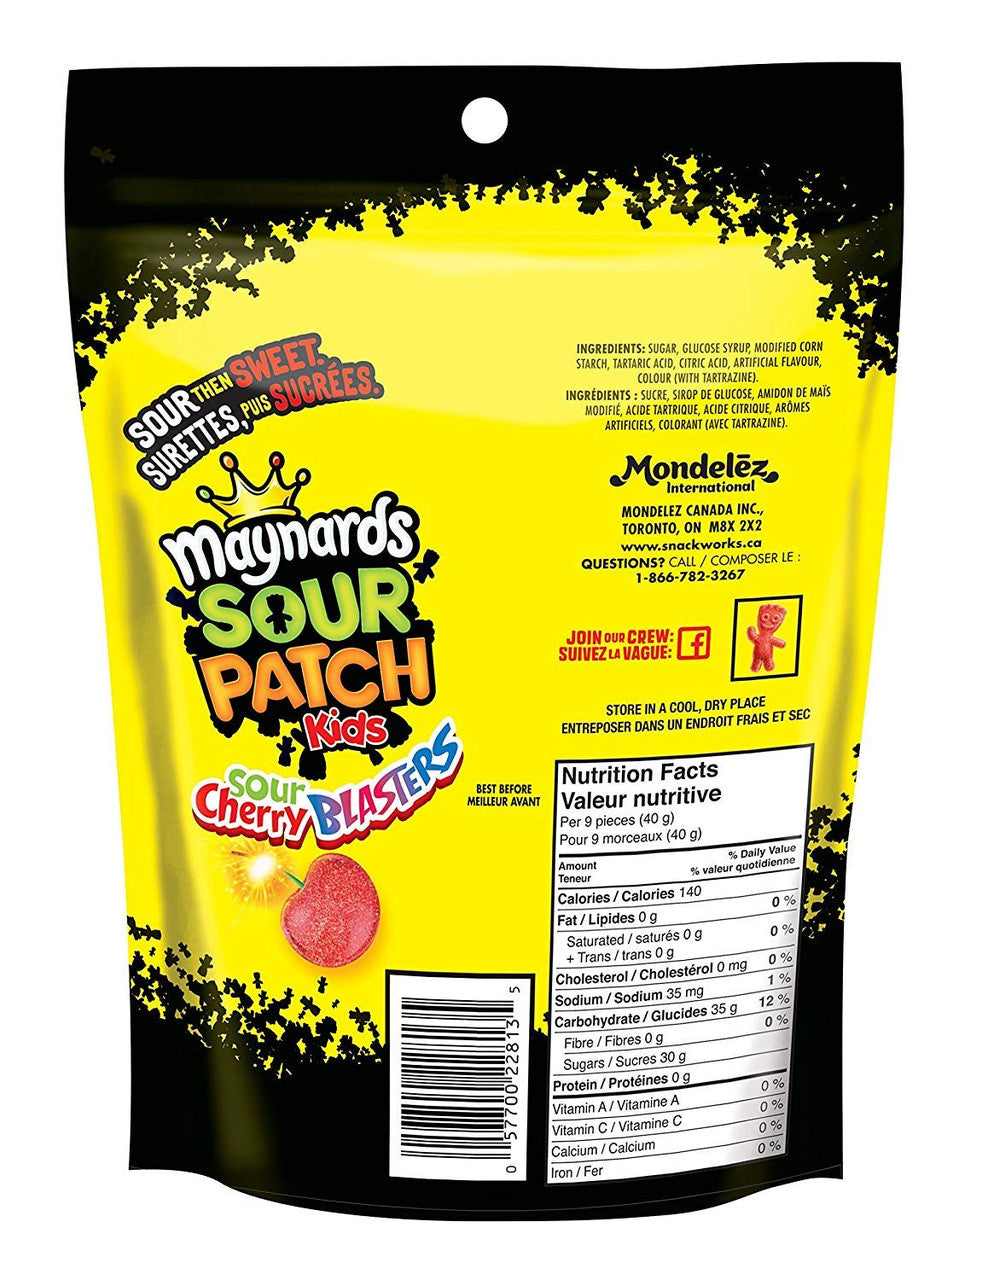 Maynards Sour Cherry Blasters Candy, 355g/12.5 oz {Imported from Canada}